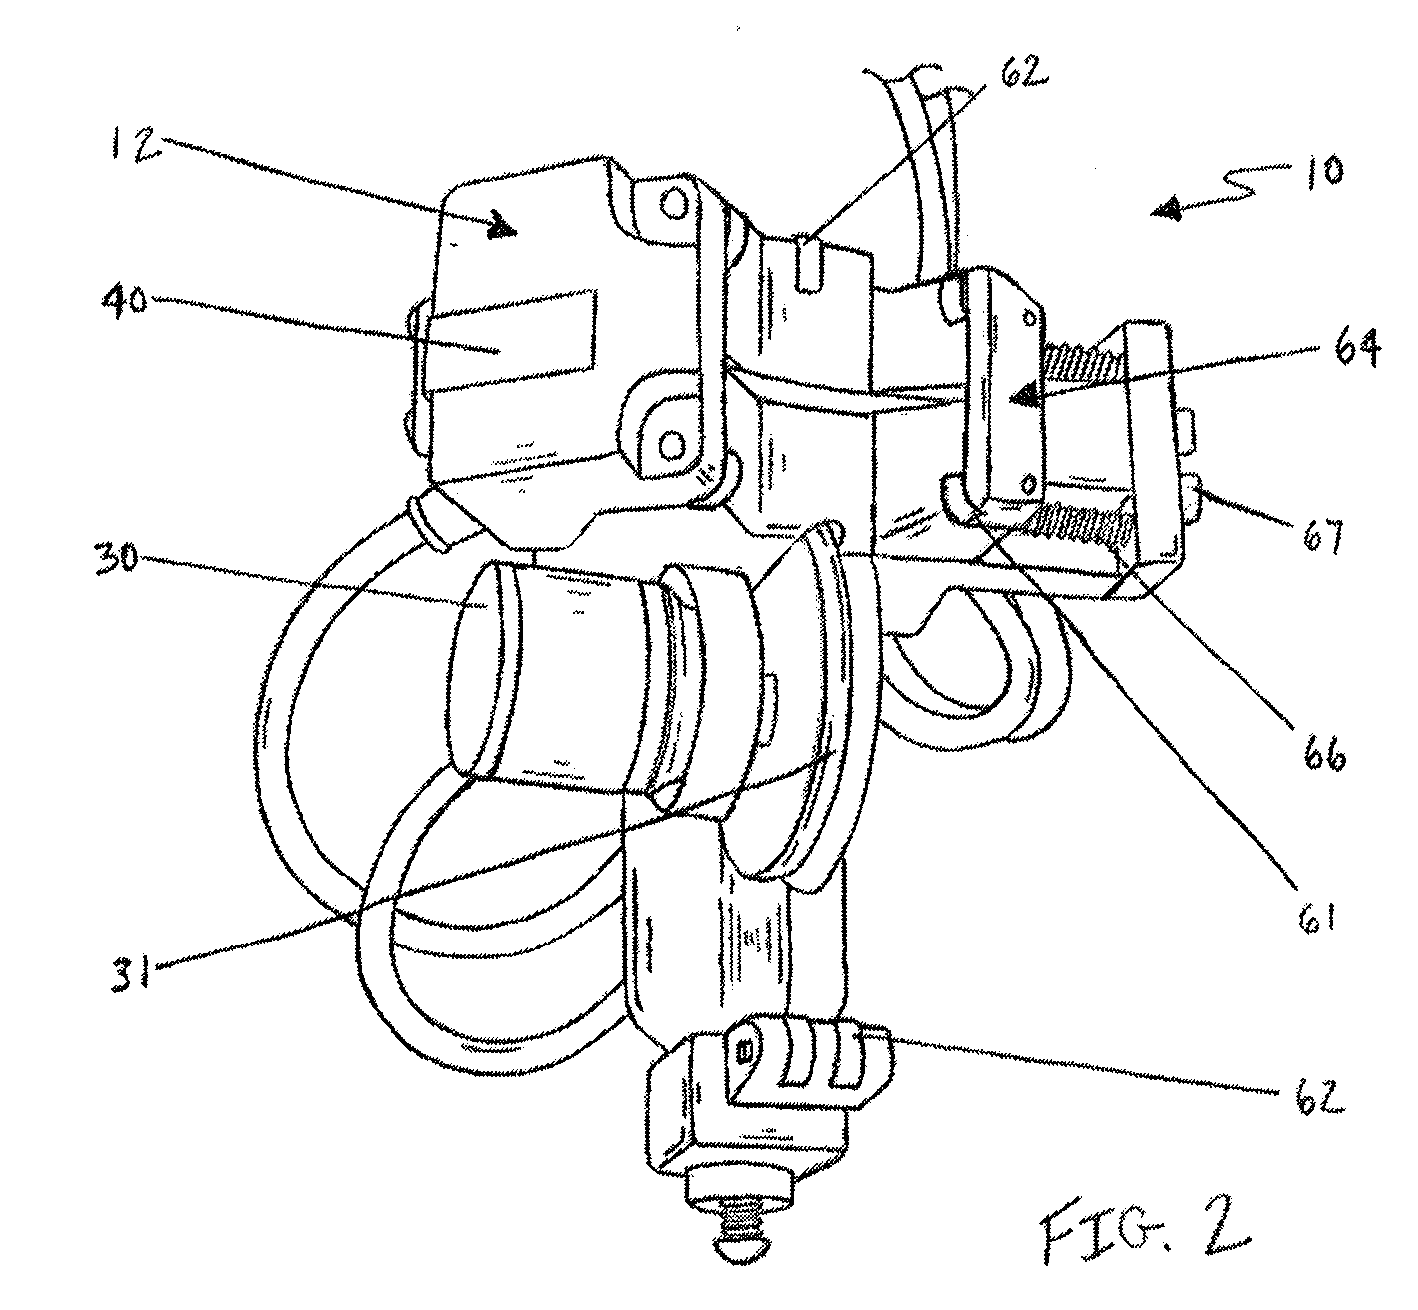 Integrated curved linear ultrasonic transducer inspection apparatus, systems, and methods